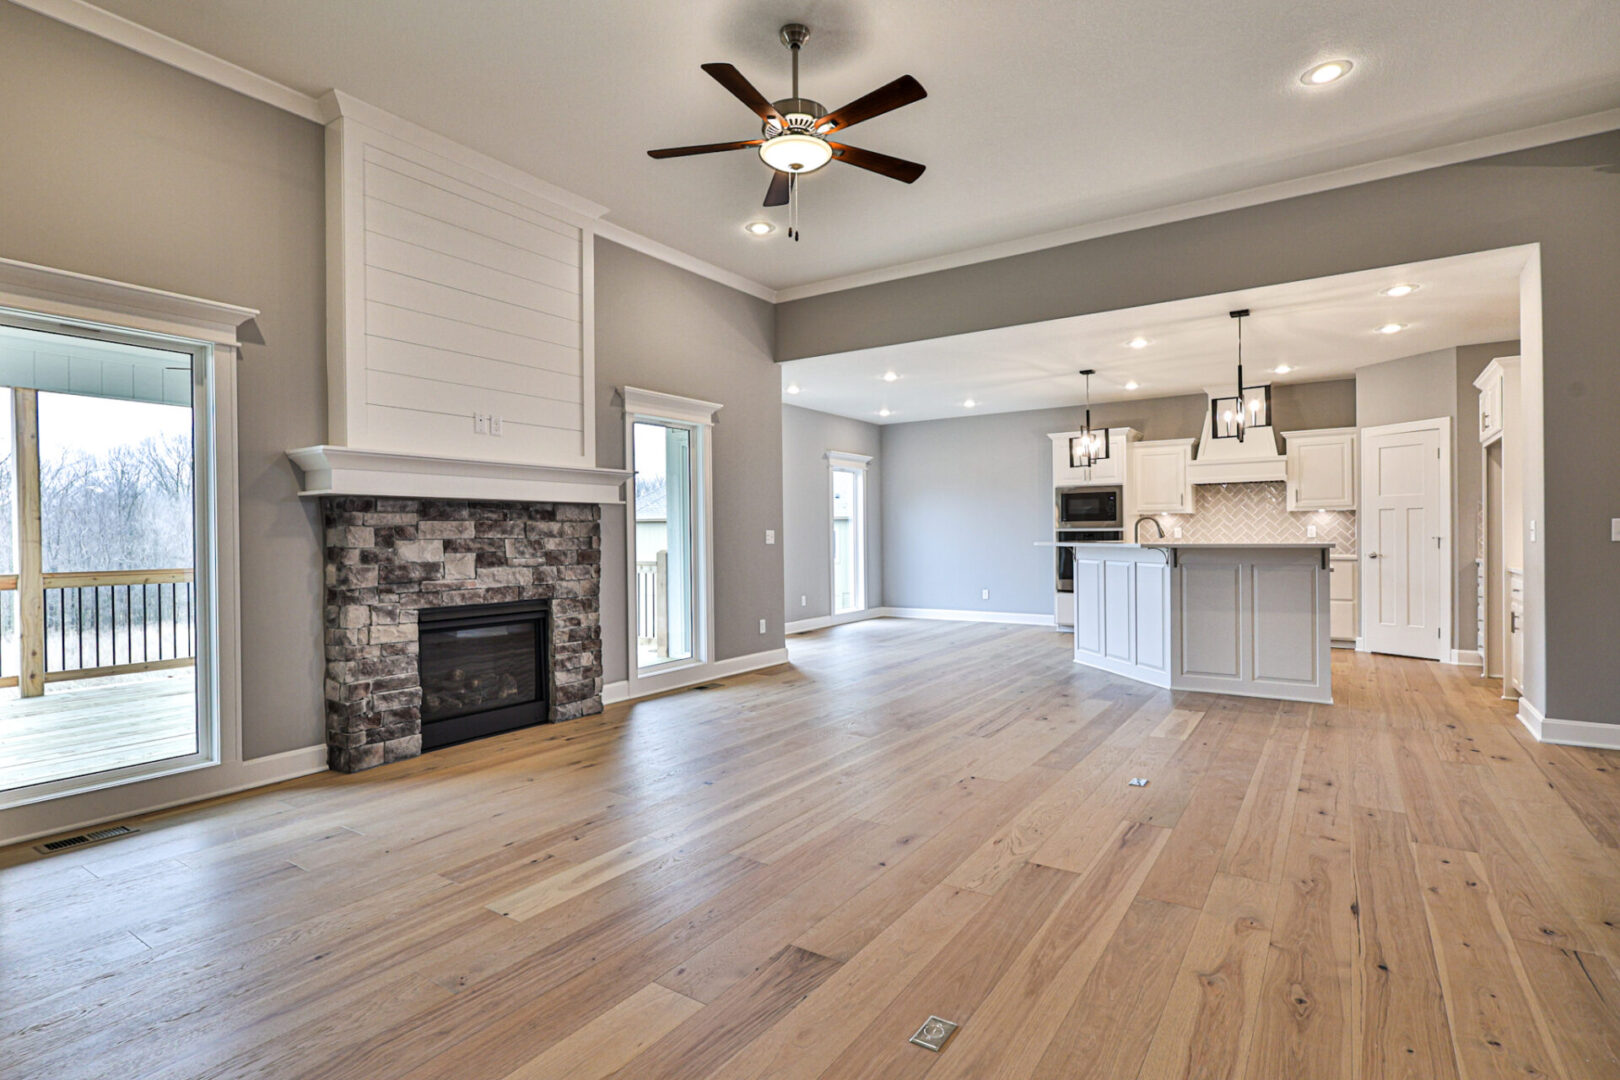 A large open floor plan with a fireplace and kitchen.